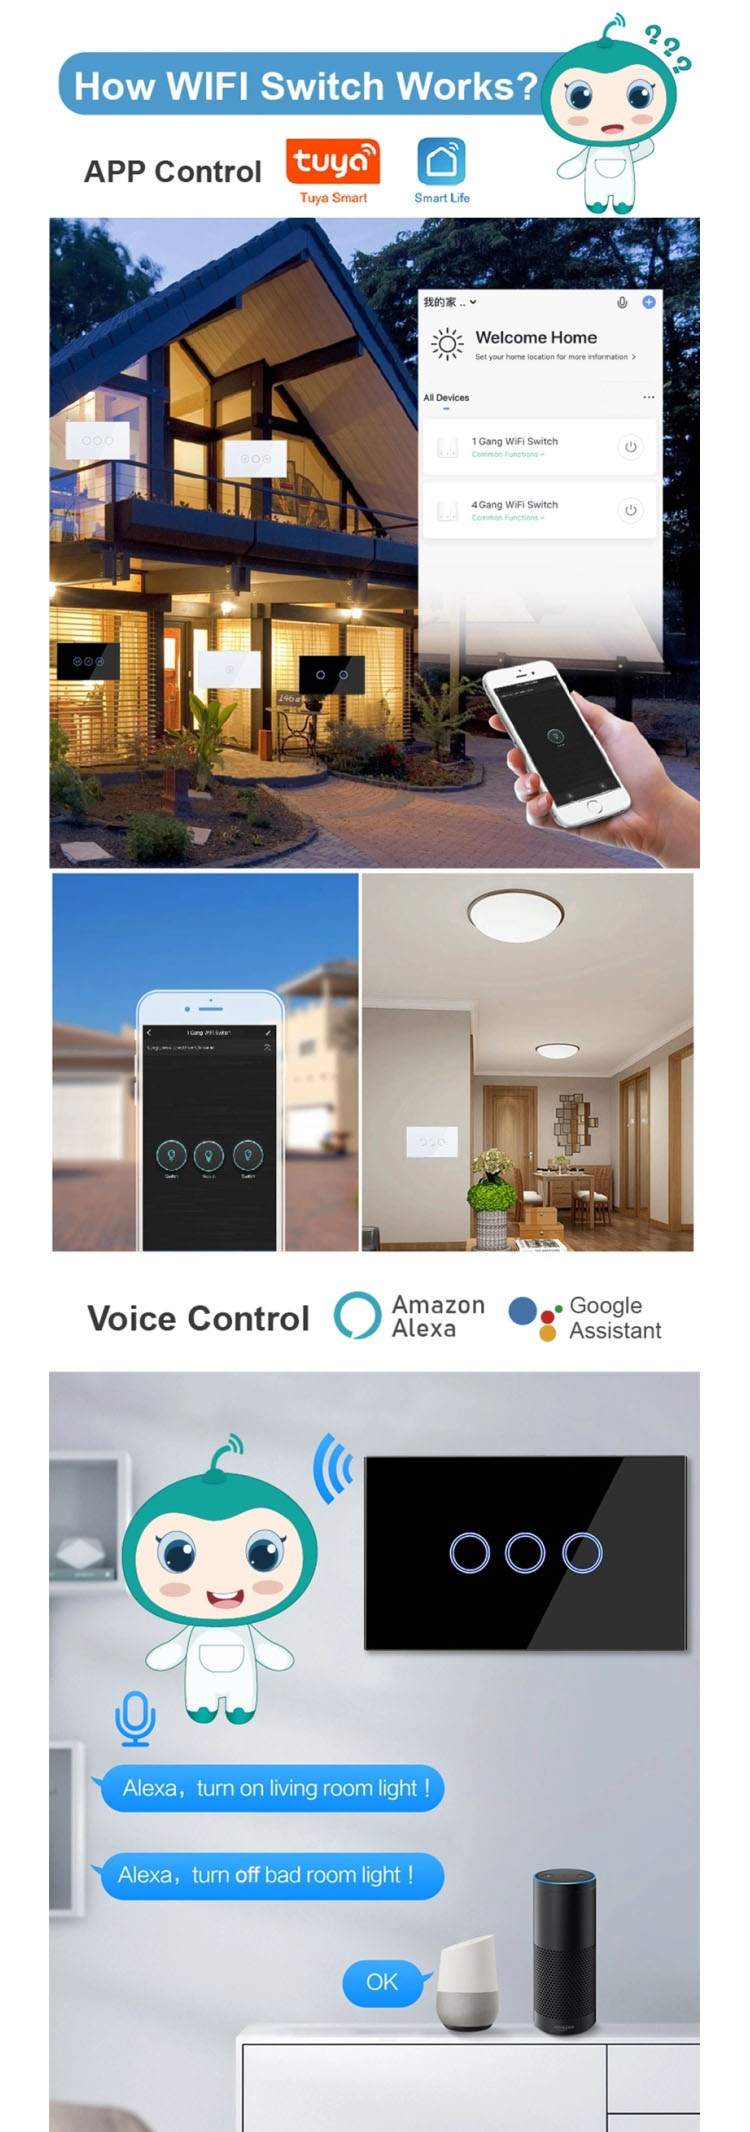 Us Smart Wifi Touch Switch